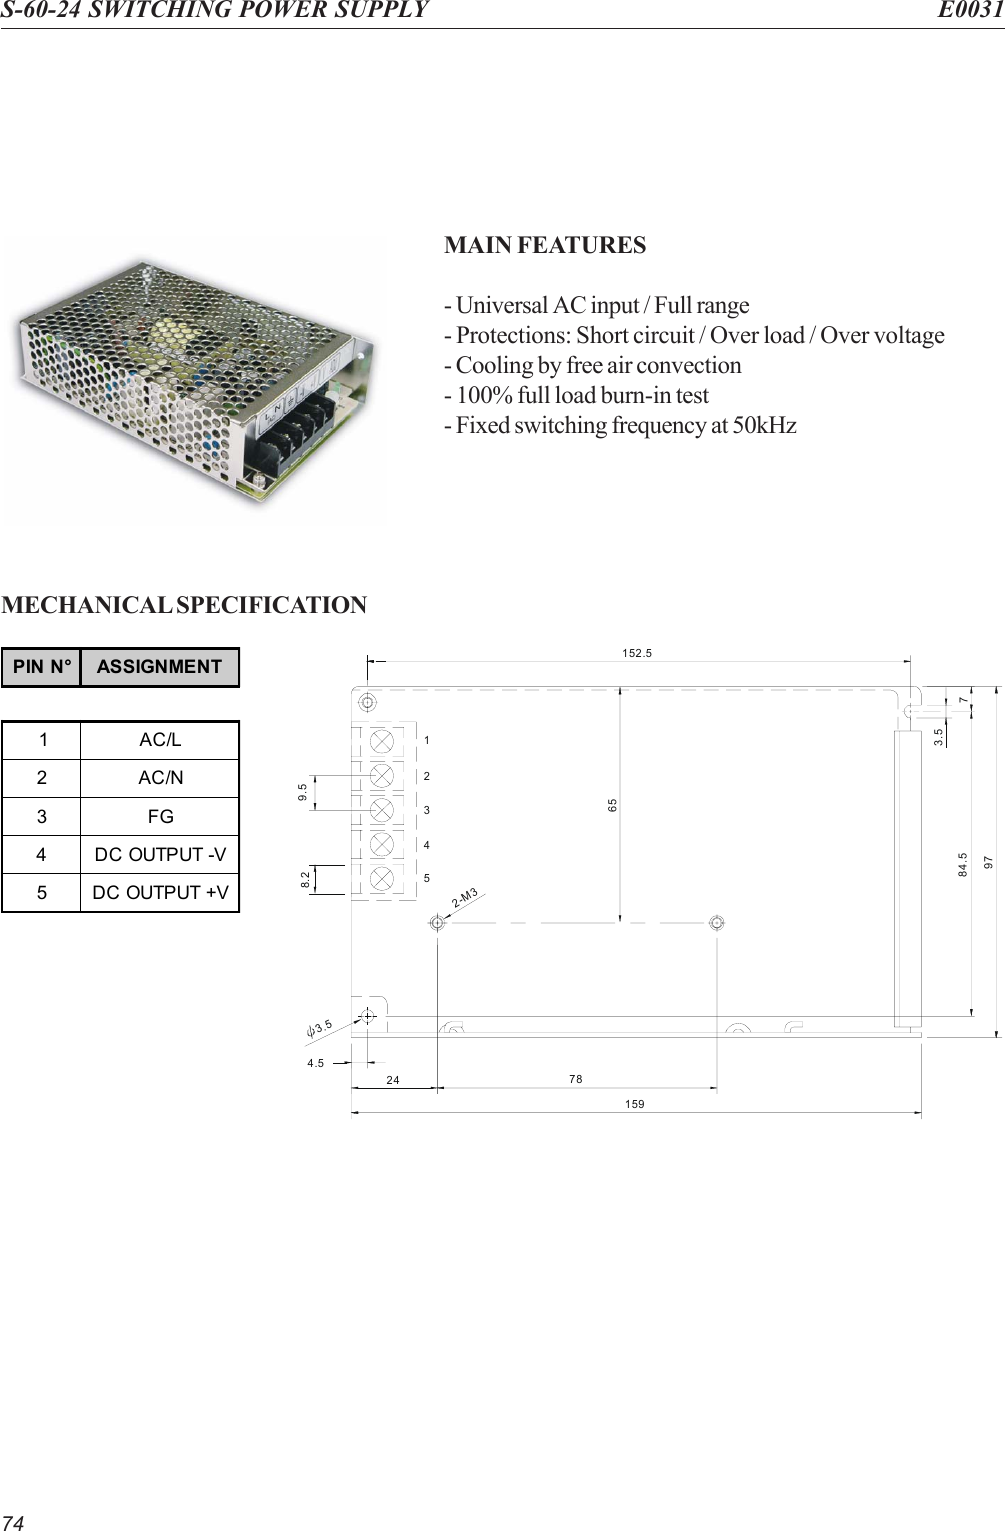 74S-60-24 SWITCHING POWER SUPPLY E0031MAIN FEATURES- Universal AC input / Full range- Protections: Short circuit / Over load / Over voltage- Cooling by free air convection- 100% full load burn-in test- Fixed switching frequency at 50kHzMECHANICAL SPECIFICATION4.565152.59784.5 72-M378241593.53.554328.2 9.51PIN N° ASSIGNMENT1AC/L2AC/N3FG4 DC OUTPUT -V5DC OUTPUT +V